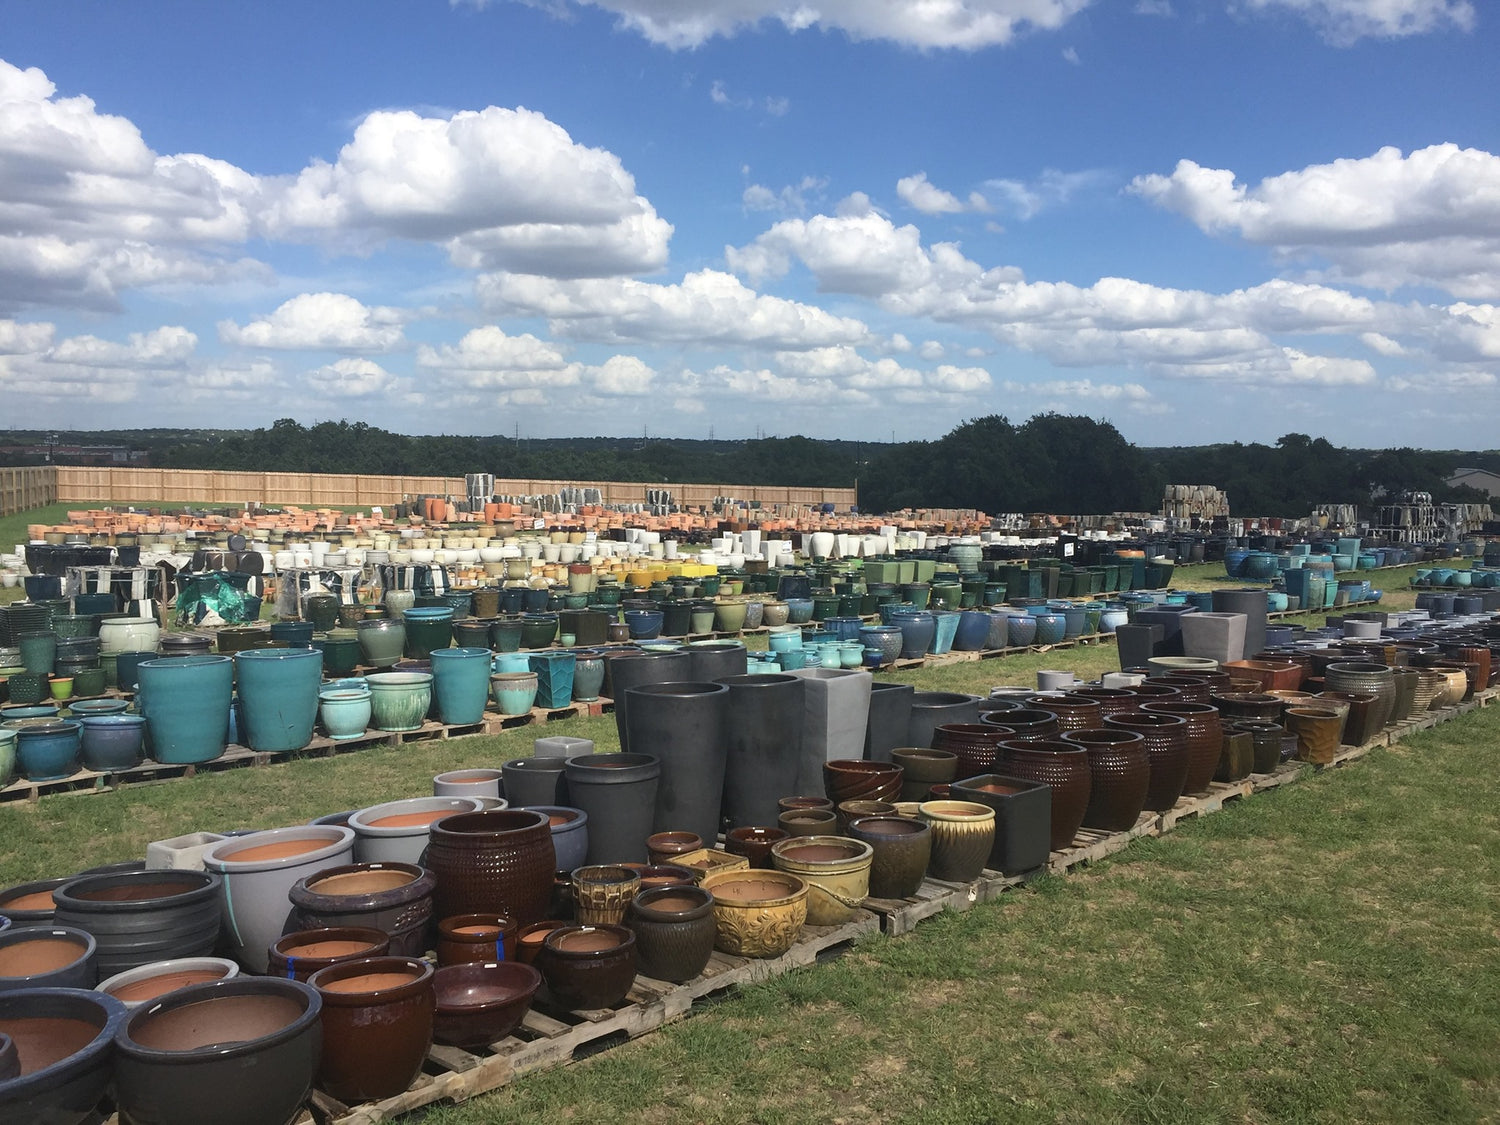 Image of a cast array of pottery planters aligned by color.